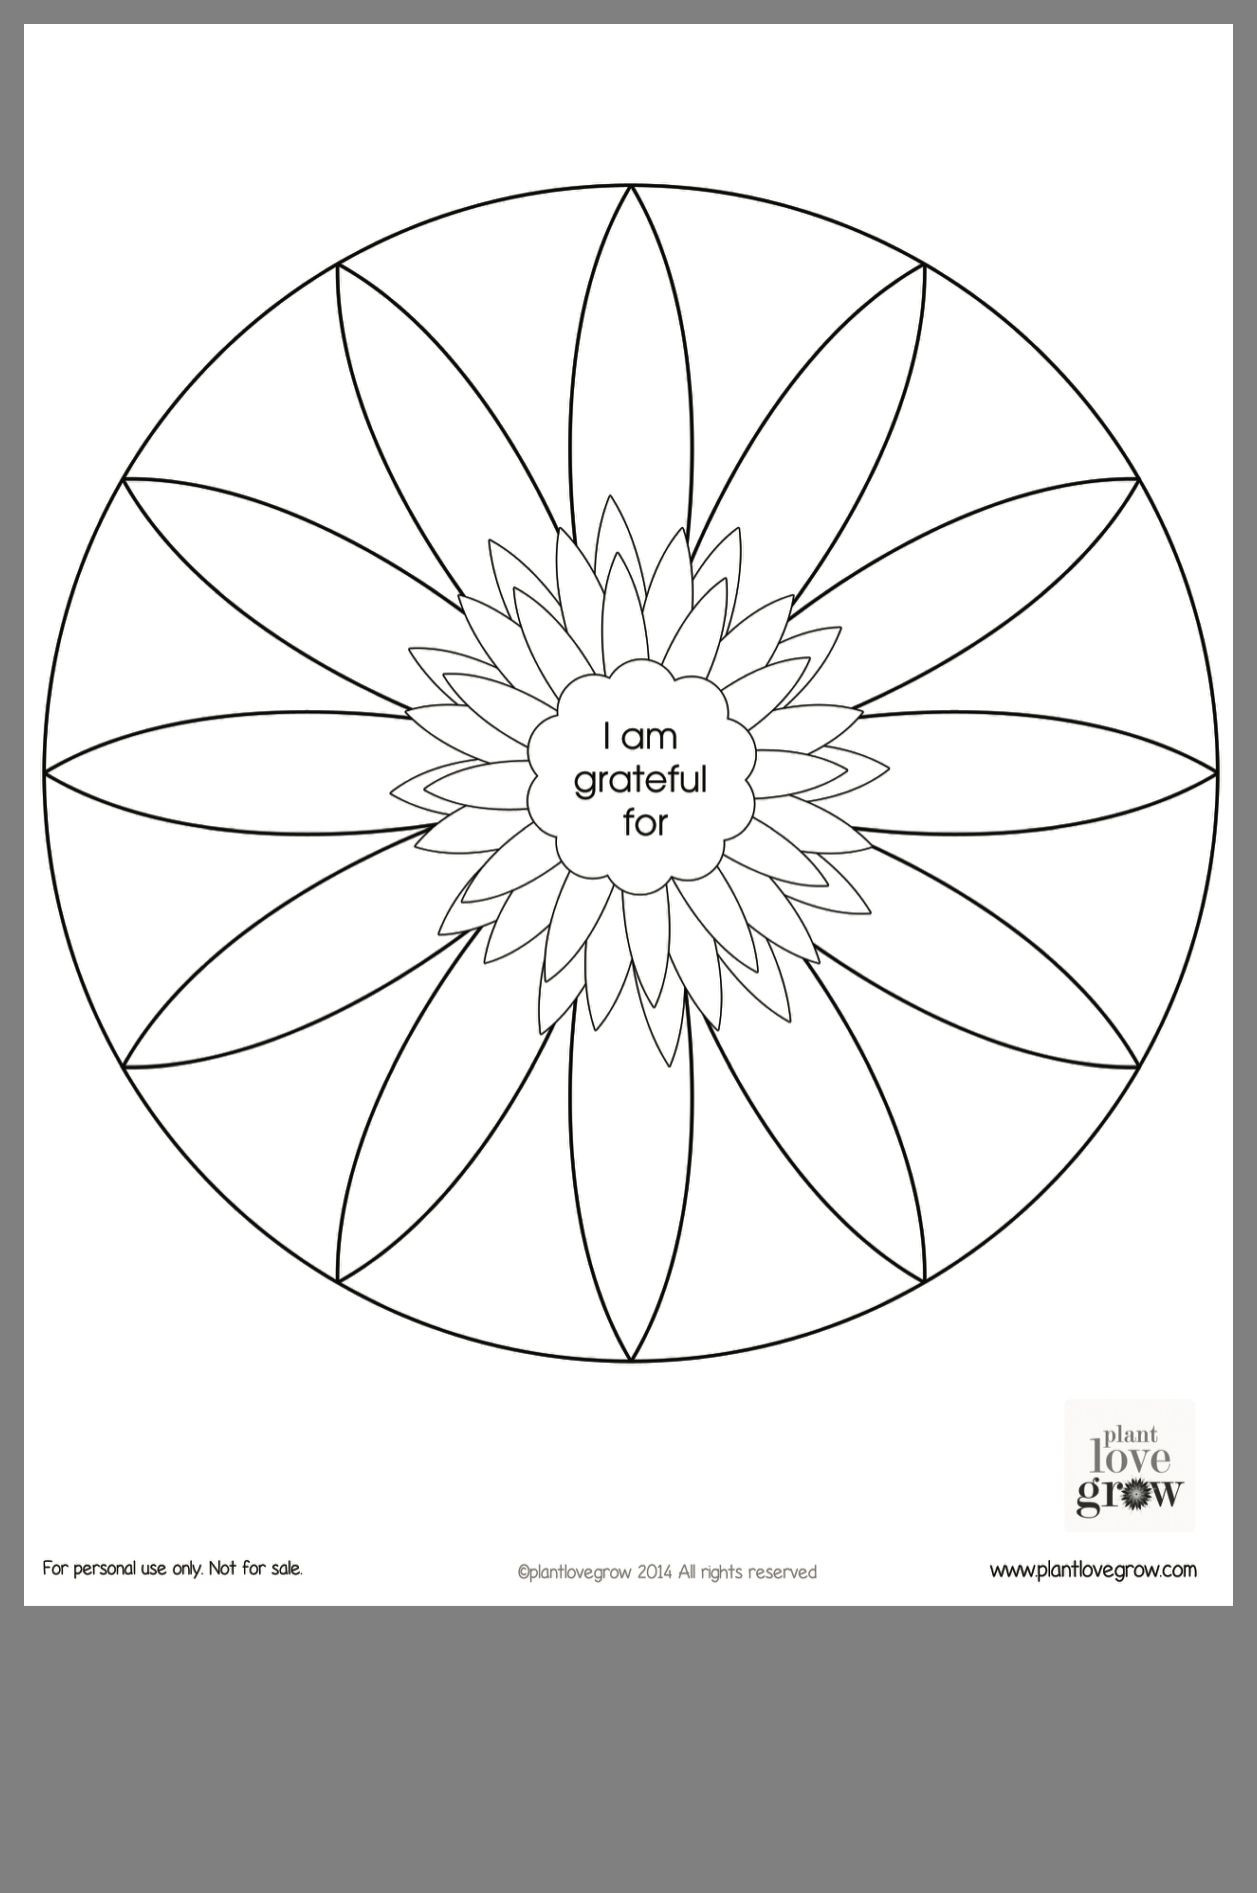 Coloring Therapy For Kids
 Pin by Misty Hayes on Therapy